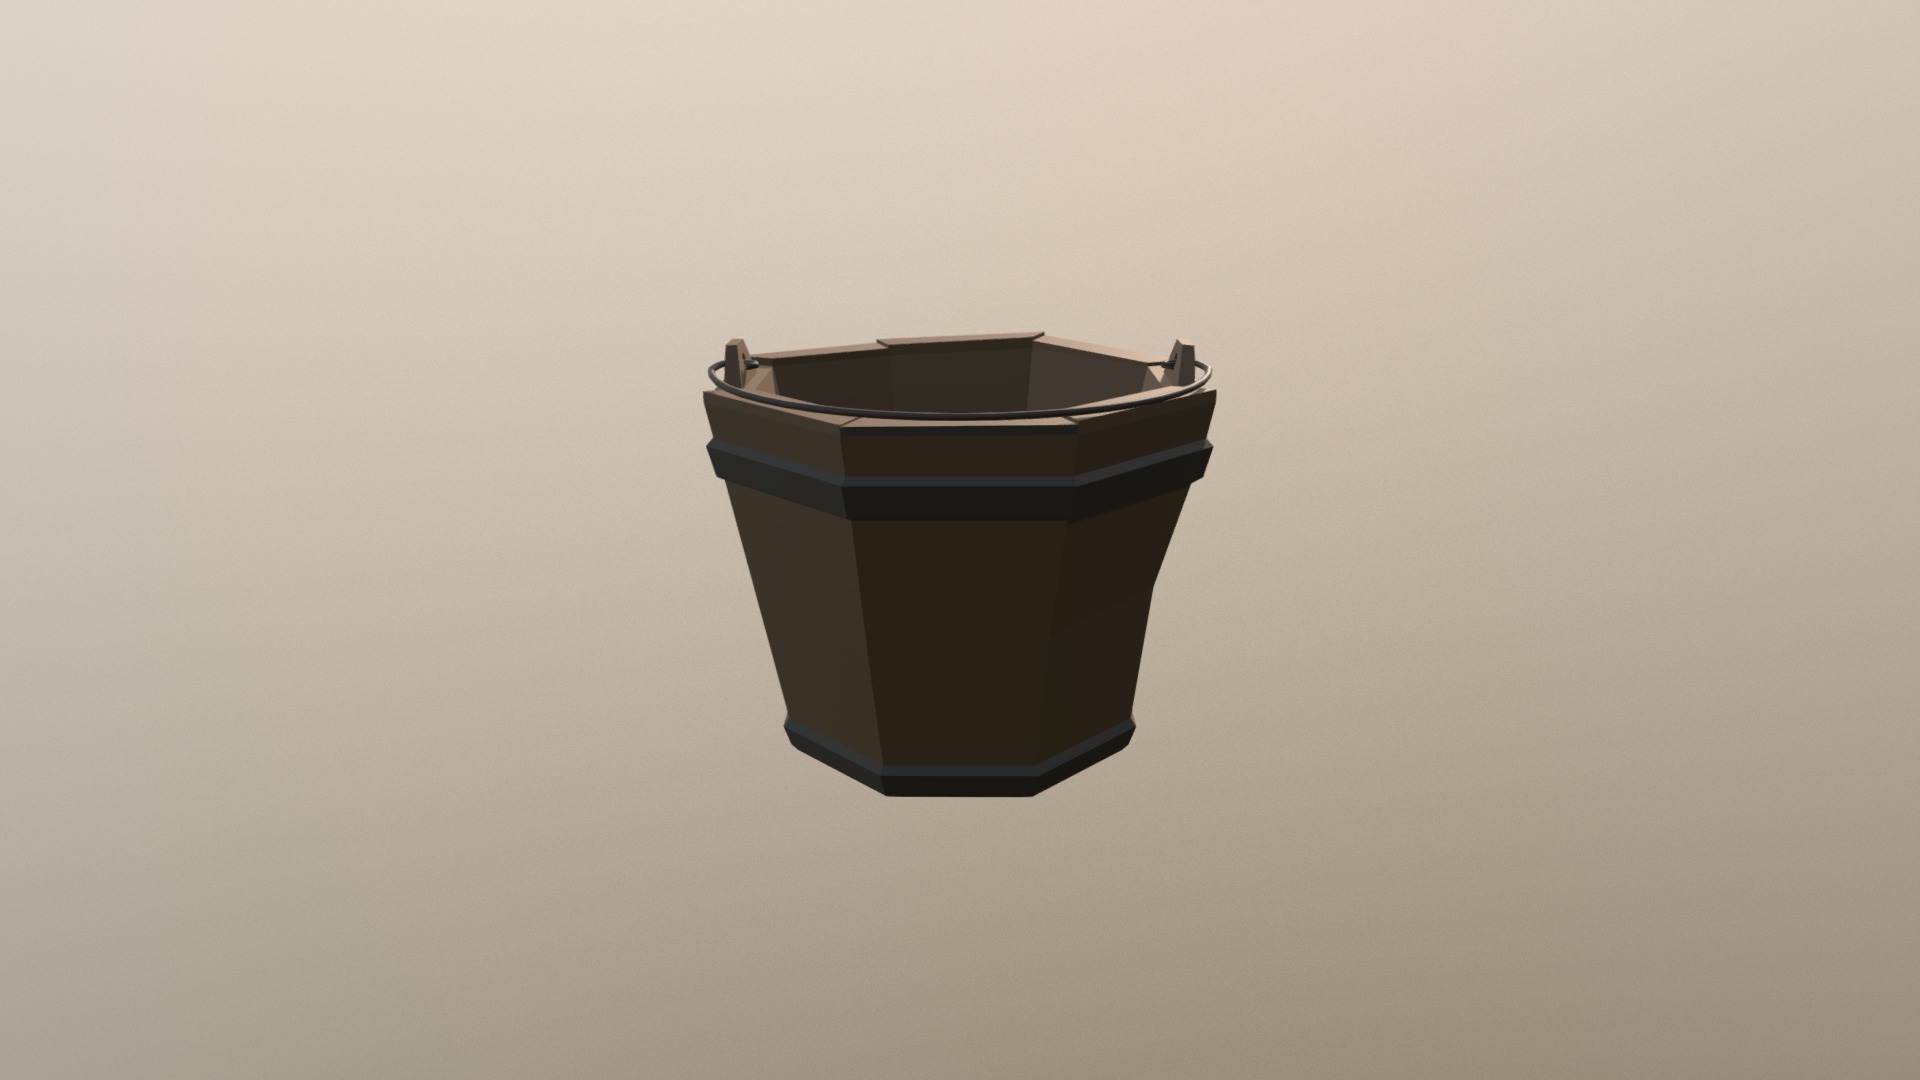 3D model Low Poly Medieval Bucket - This is a 3D model of the Low Poly Medieval Bucket. The 3D model is about a black rectangular object.